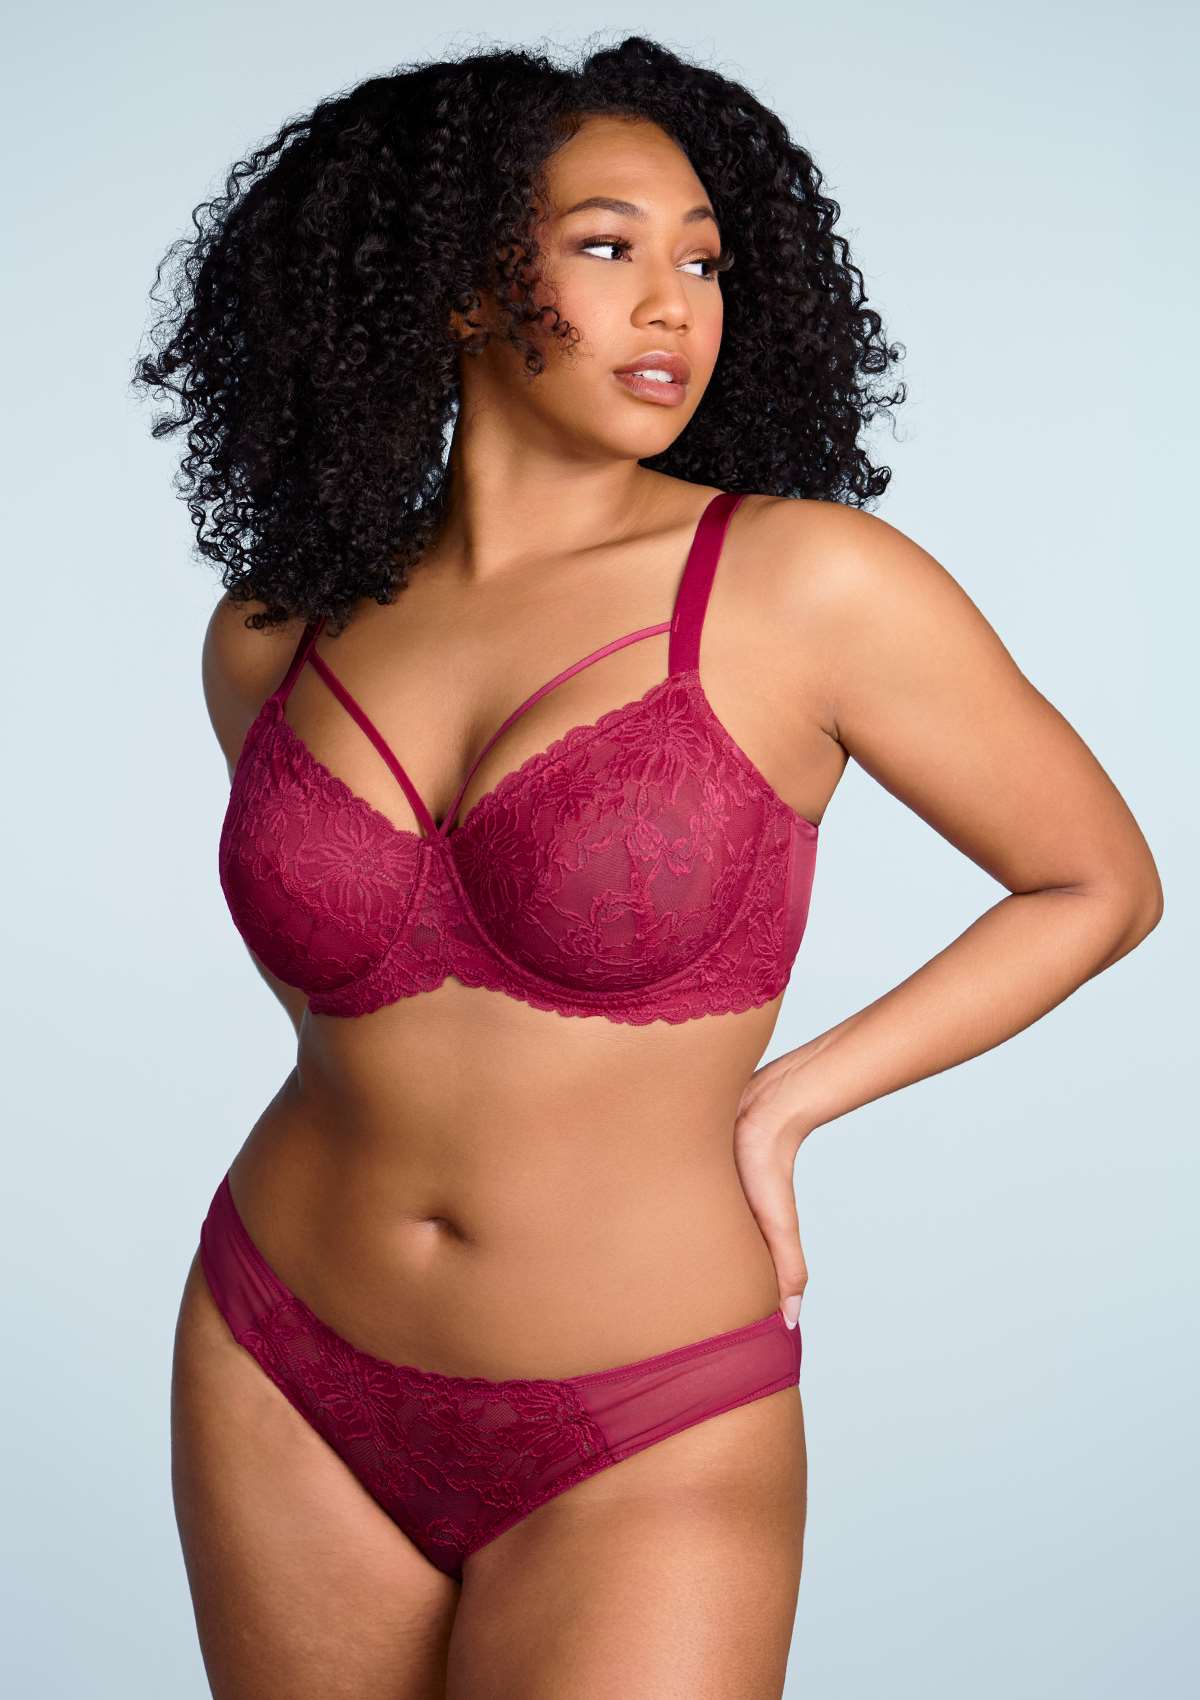 HSIA Pretty In Petals Lace Panties And Bra Set: Plus Size Women Bra - Red / 36 / I